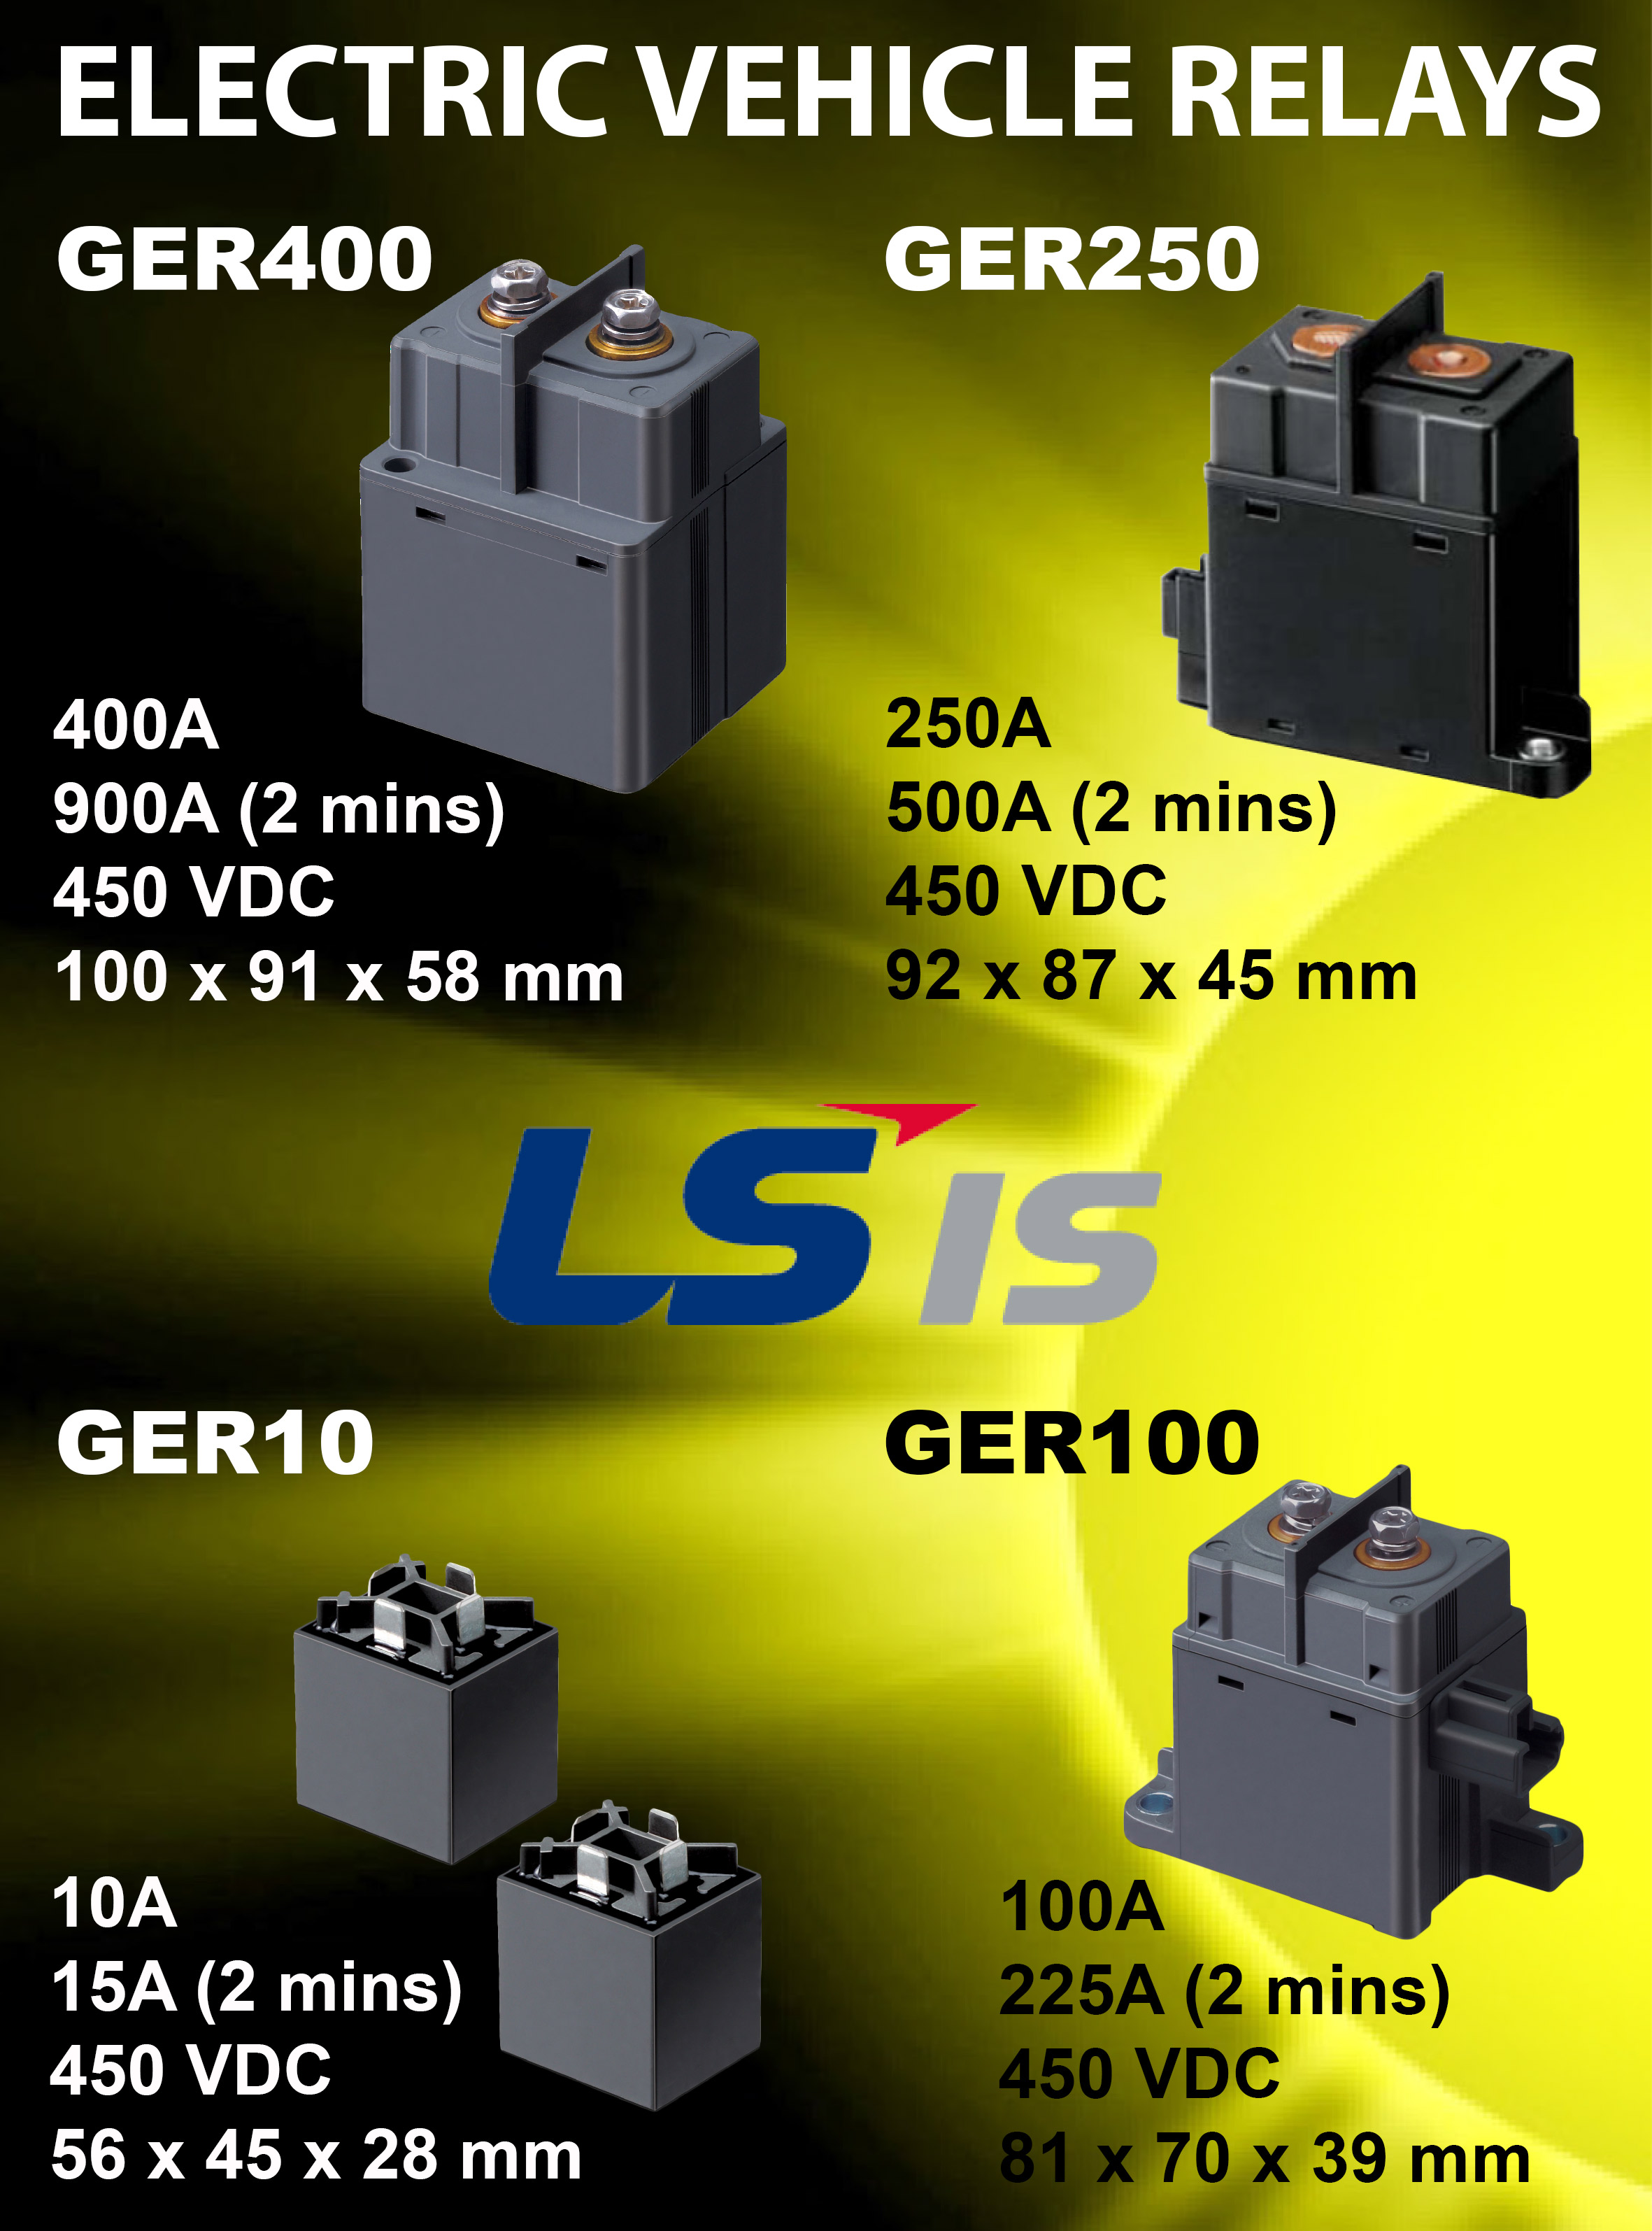 Selection-of-LSIS-Electric-Vehicle-Relays-72ppi